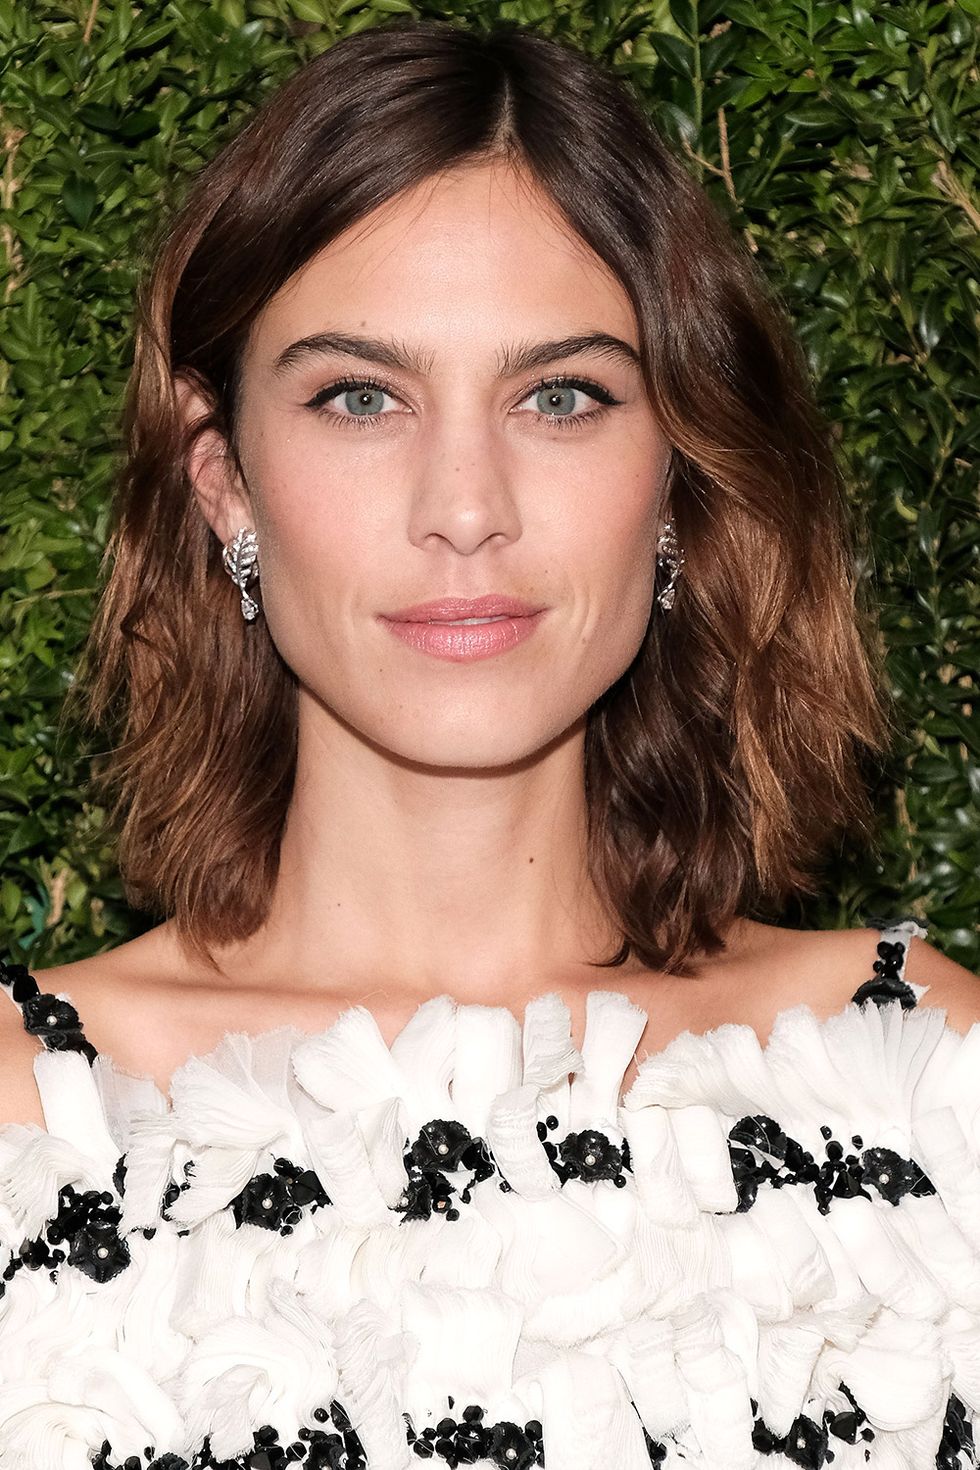 <p>When you want to break up a natural brunette shade, follow Alexa Chung's lead with golden lowlights. &nbsp;<span class="redactor-invisible-space" data-verified="redactor" data-redactor-tag="span" data-redactor-class="redactor-invisible-space"></span></p>